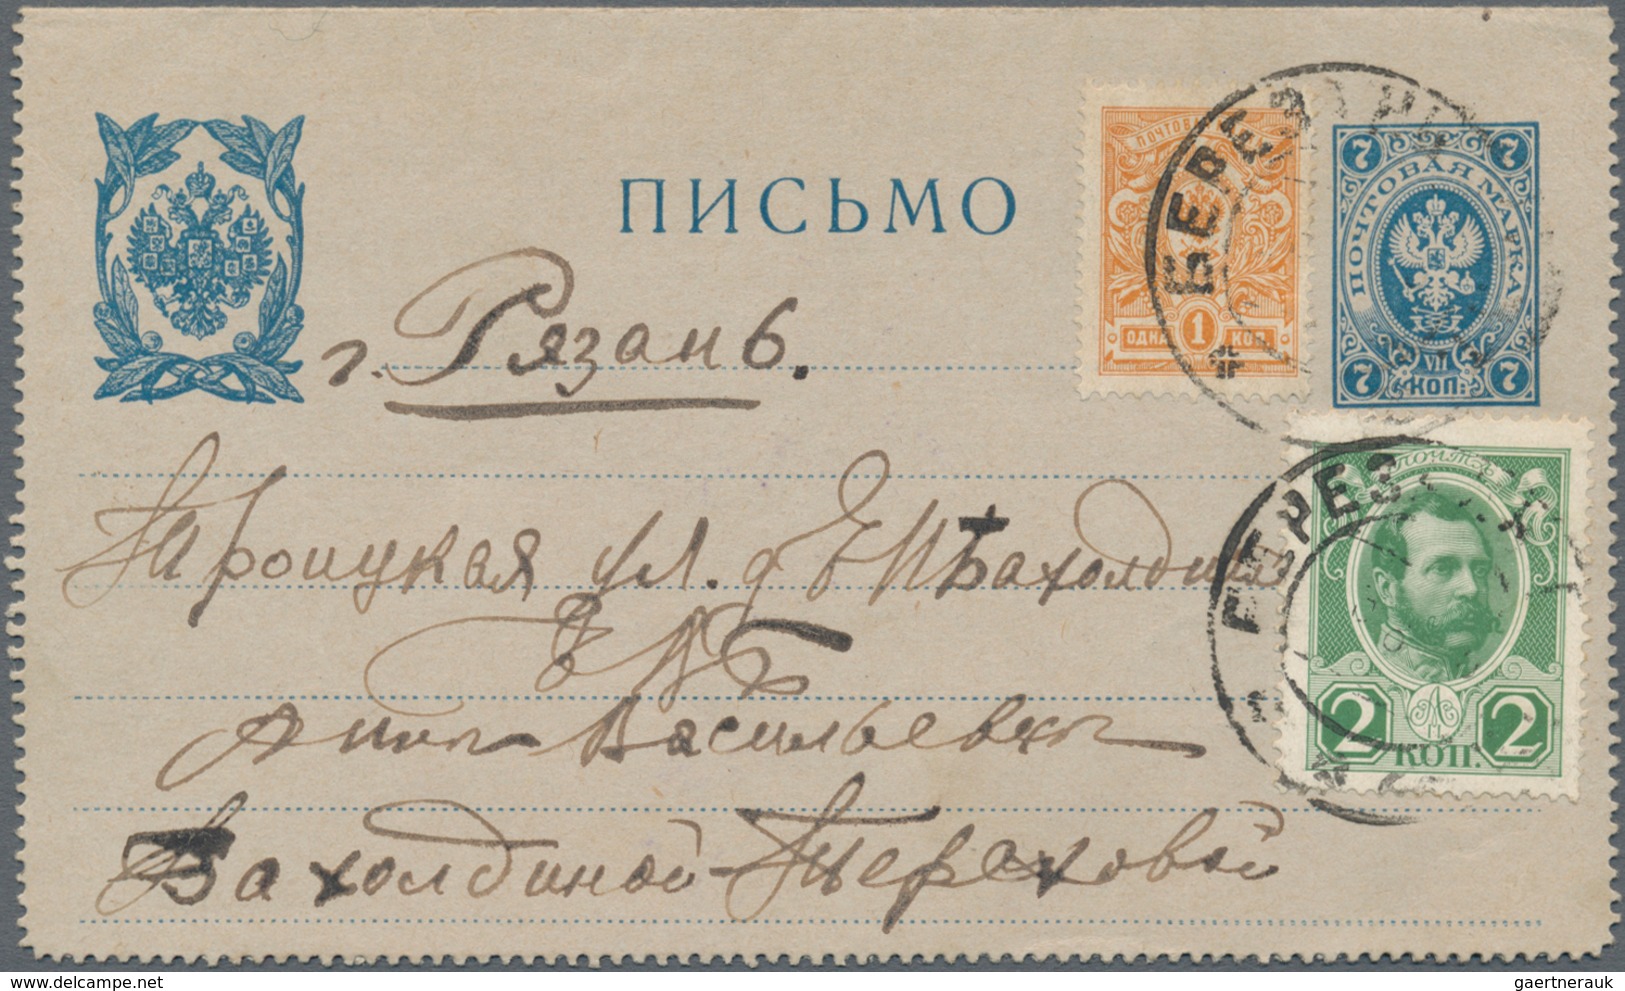 Russland - Ganzsachen: 1877/1917 holding of ca. 140 unused and used postal stationery postcards, env